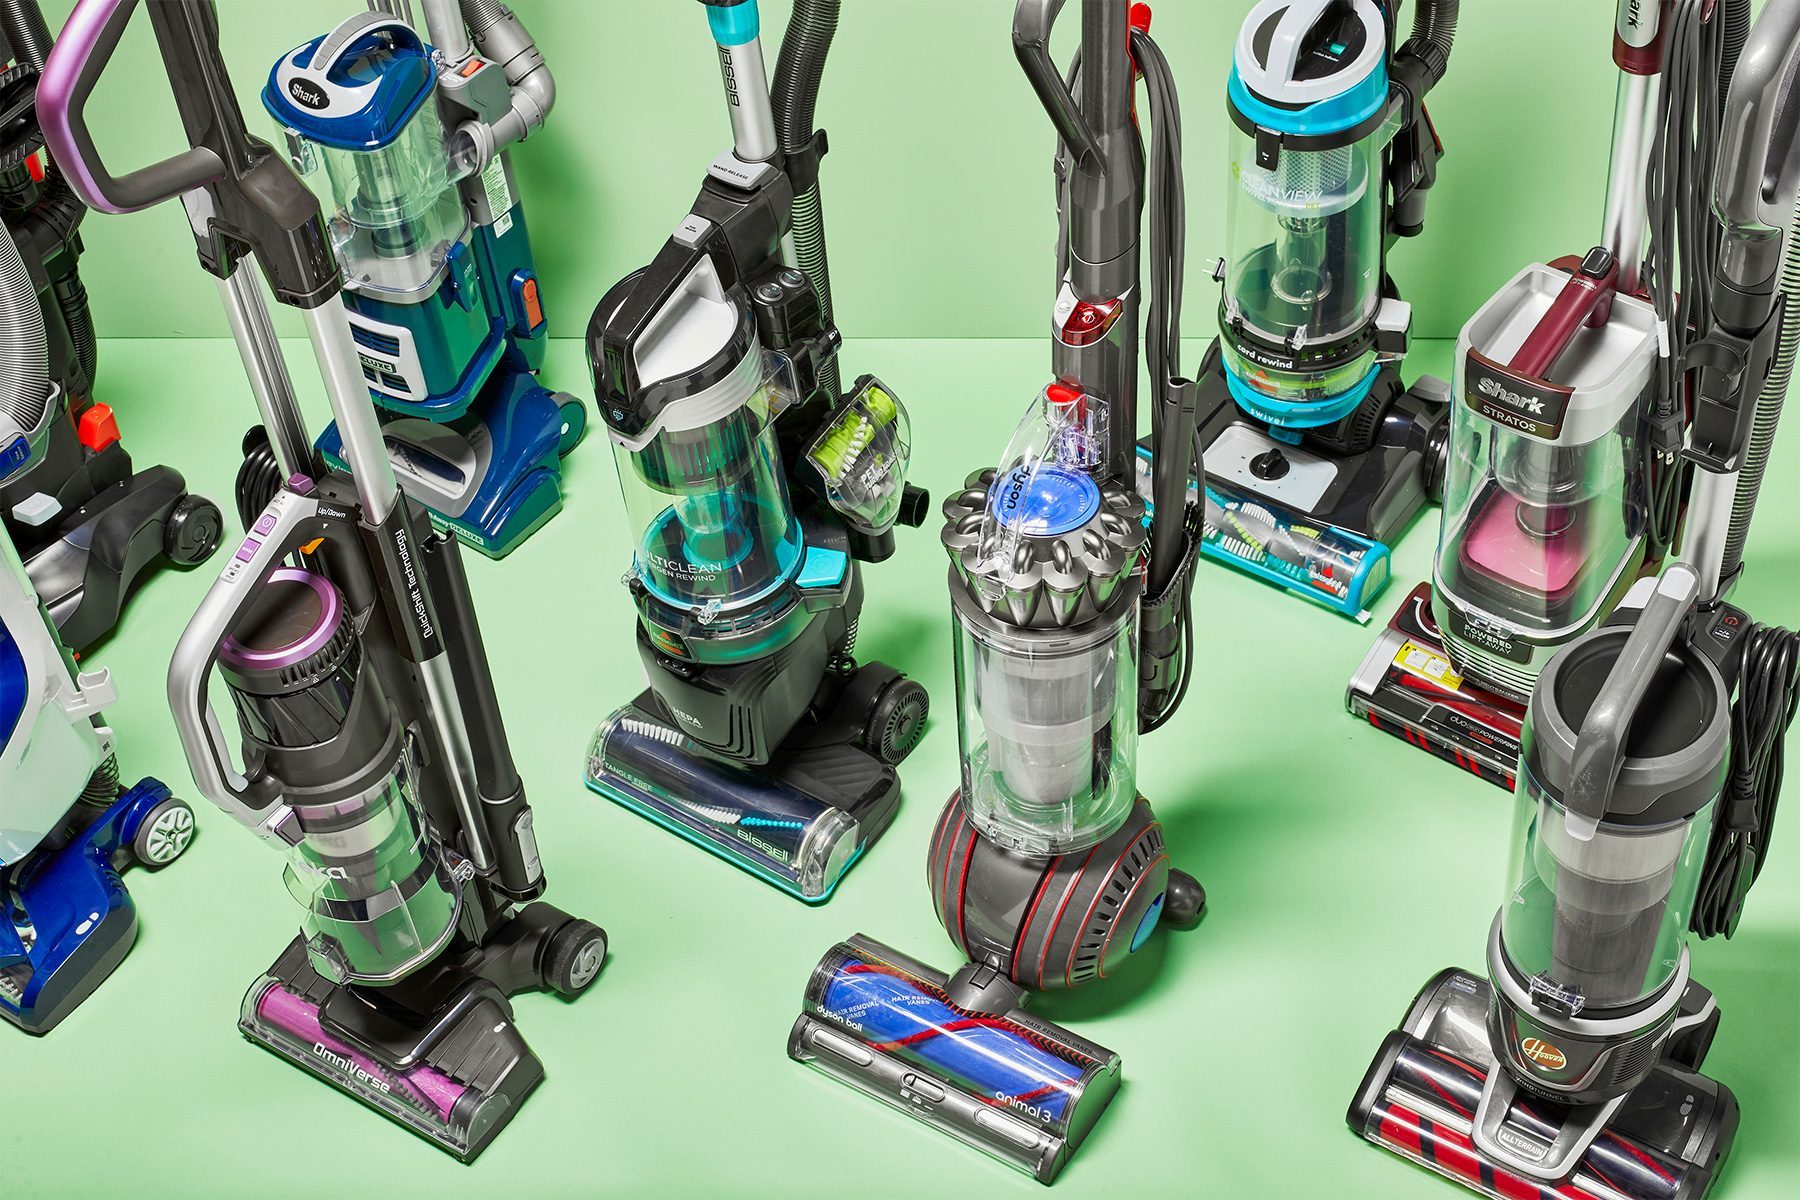 The 9 Best Upright Vacuum Cleaners Group Shot